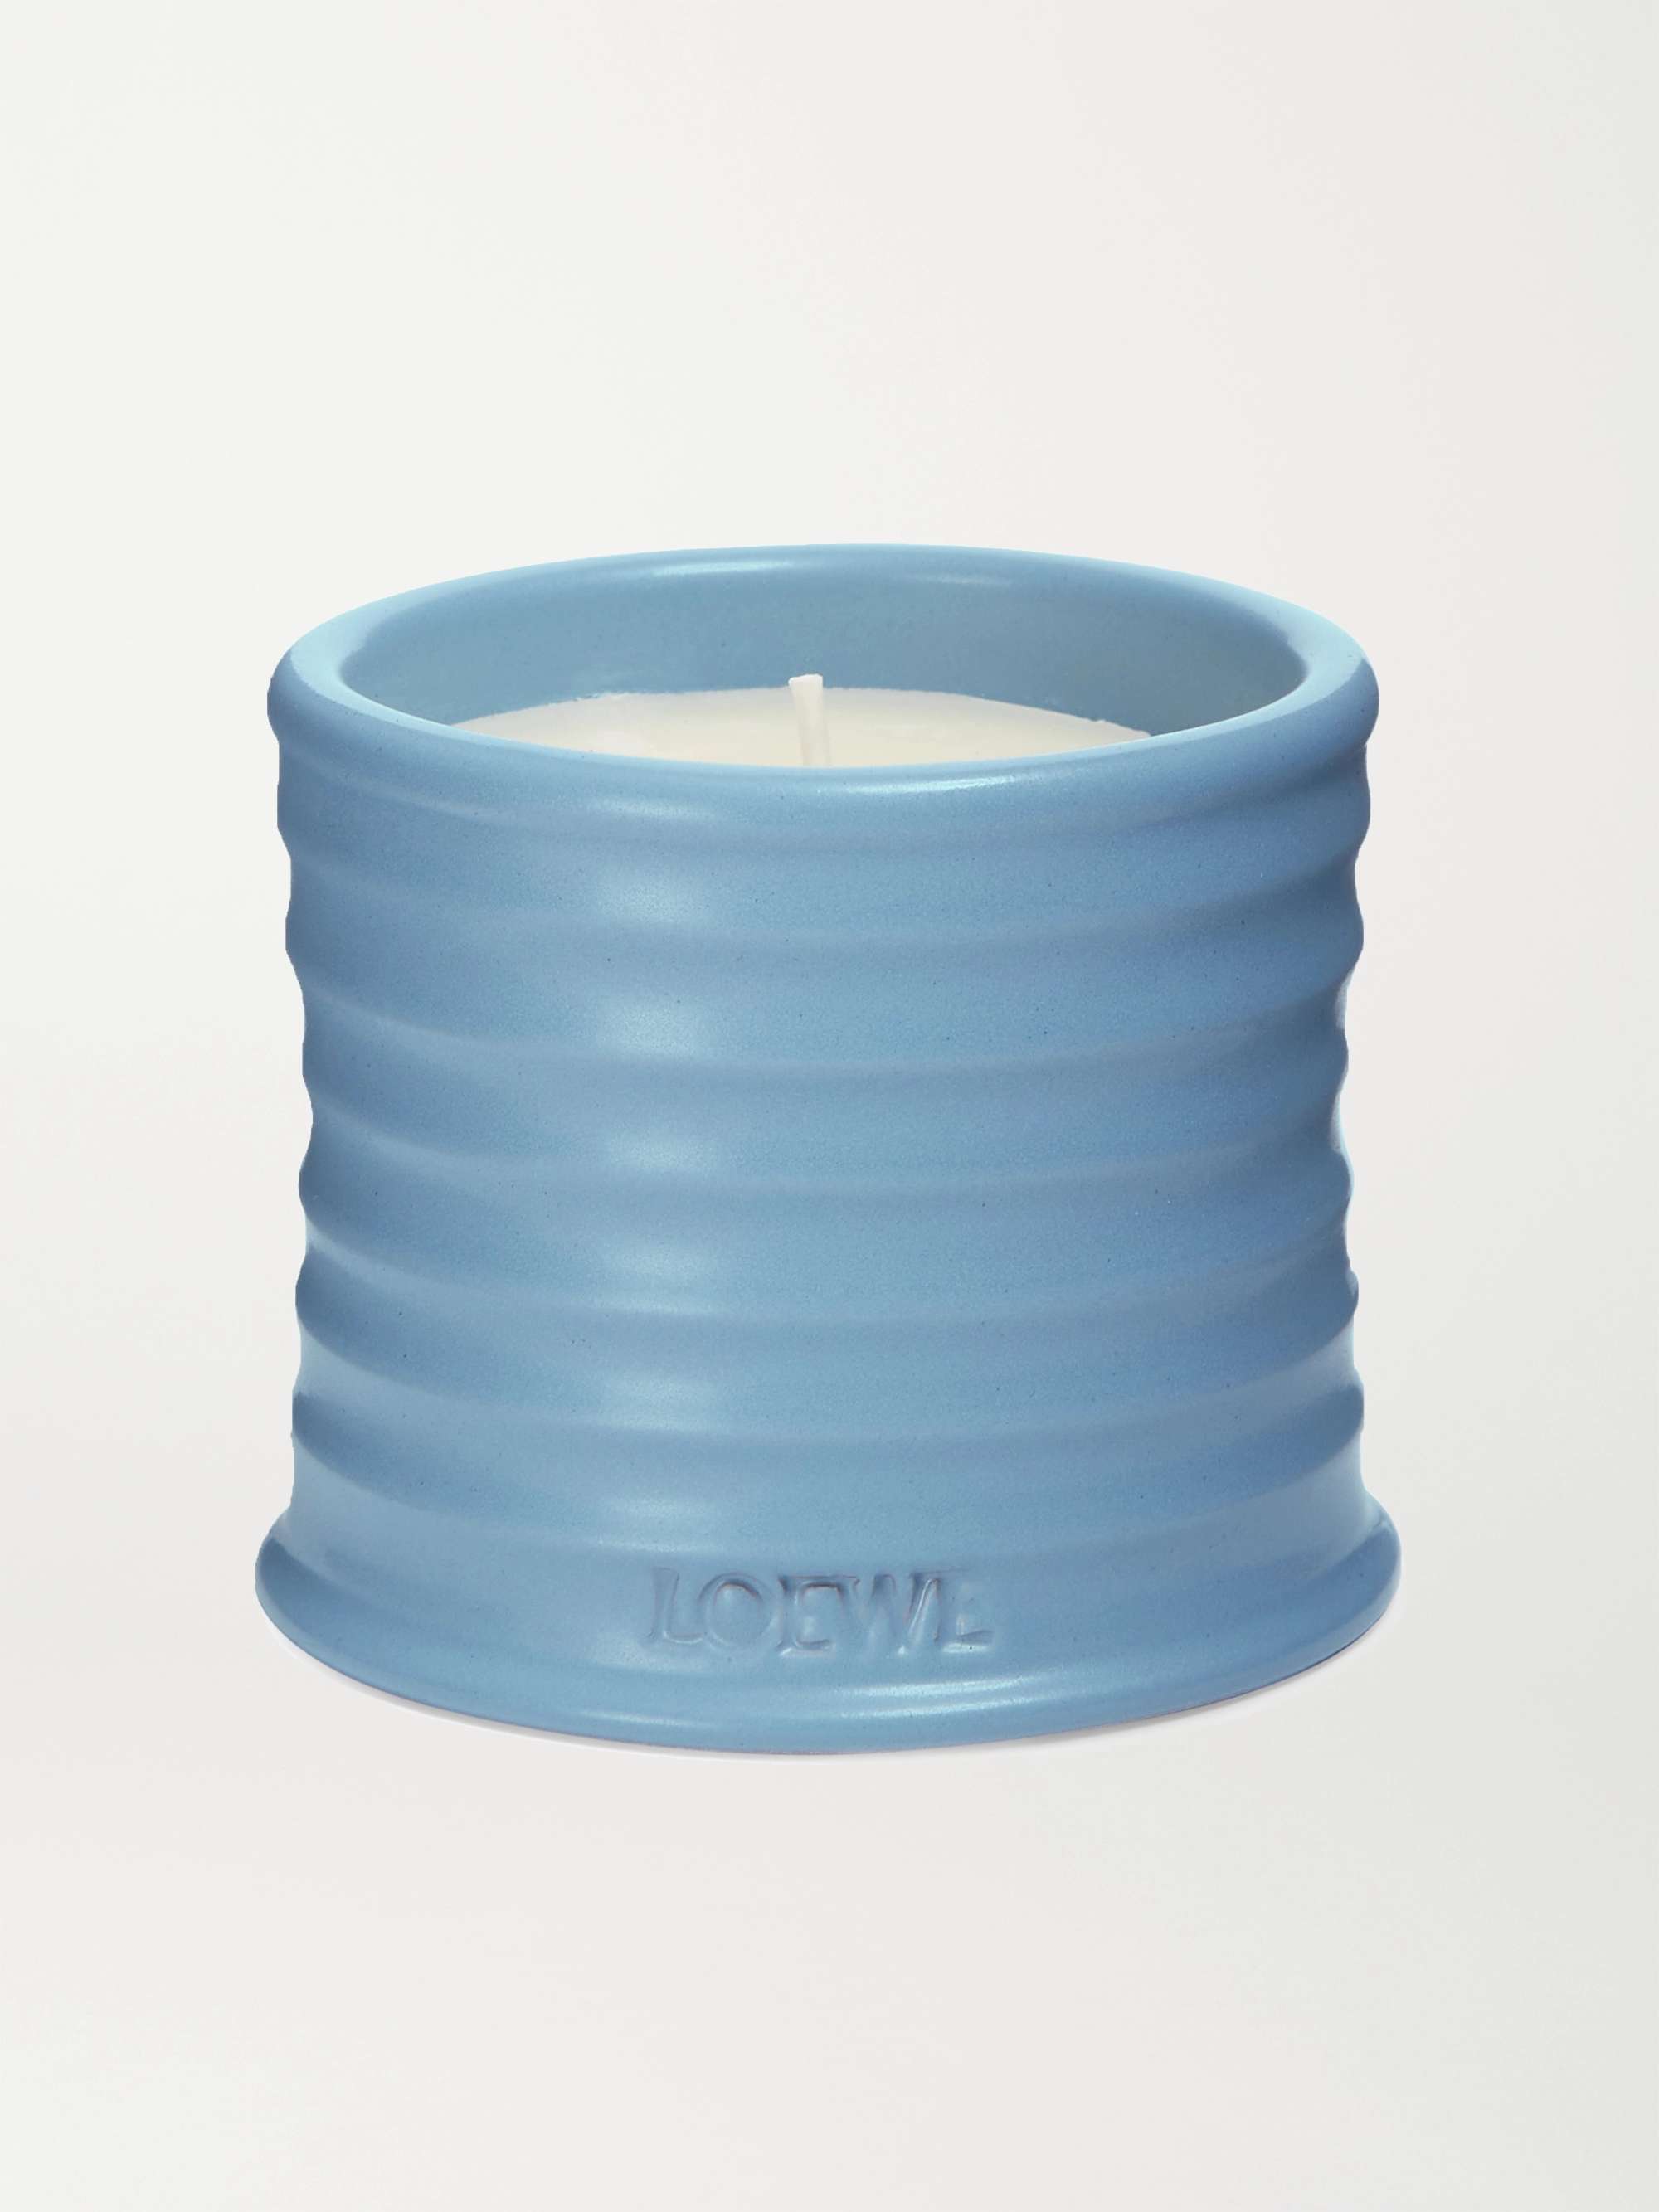 LOEWE HOME SCENTS Cypress Balls Scented Candle, 170g